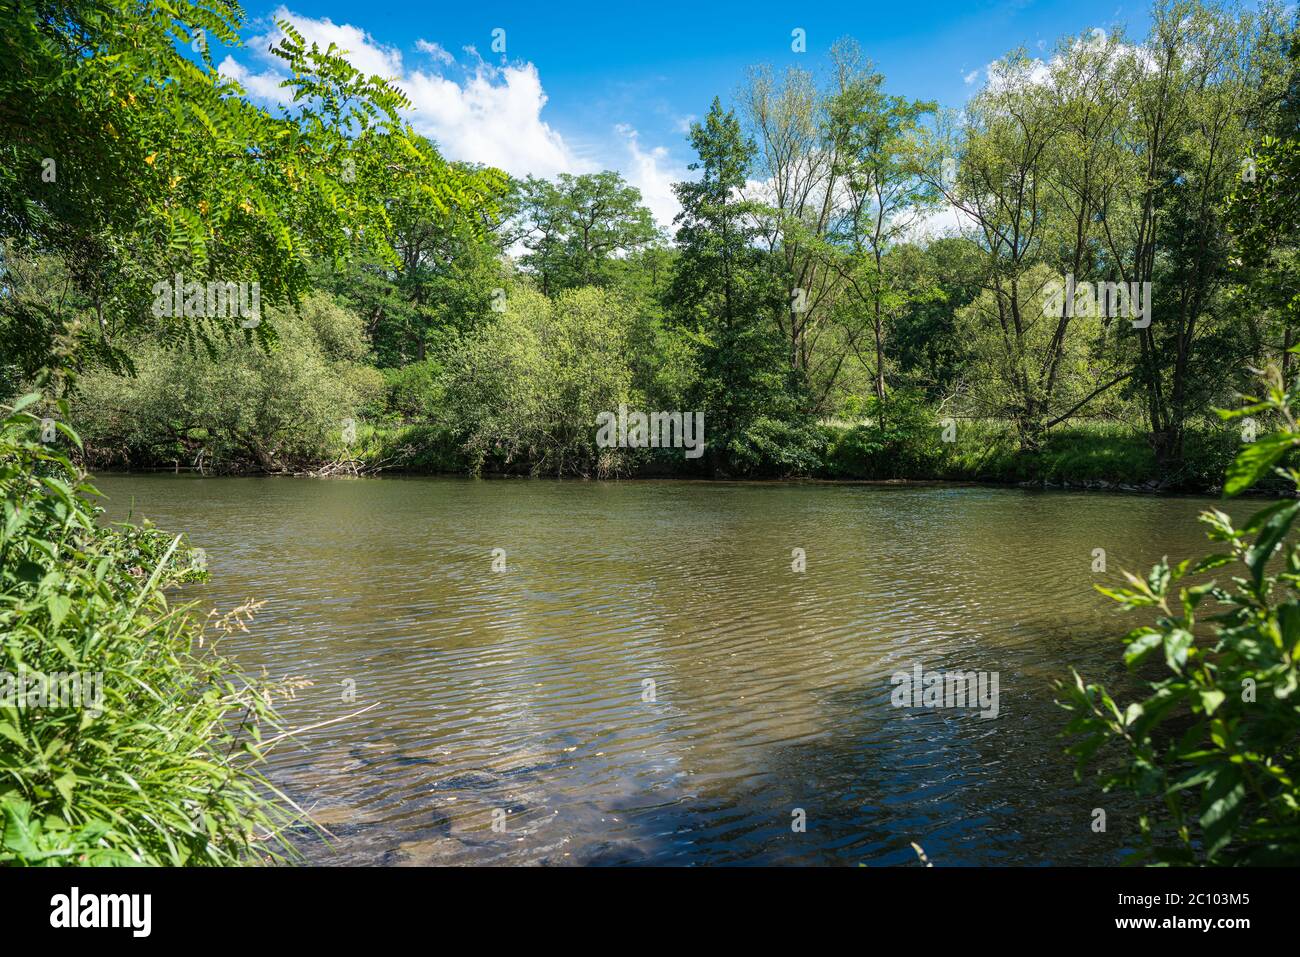 View across the river Agger to the opposite bank. An early summer scene on a nice day. Stock Photo